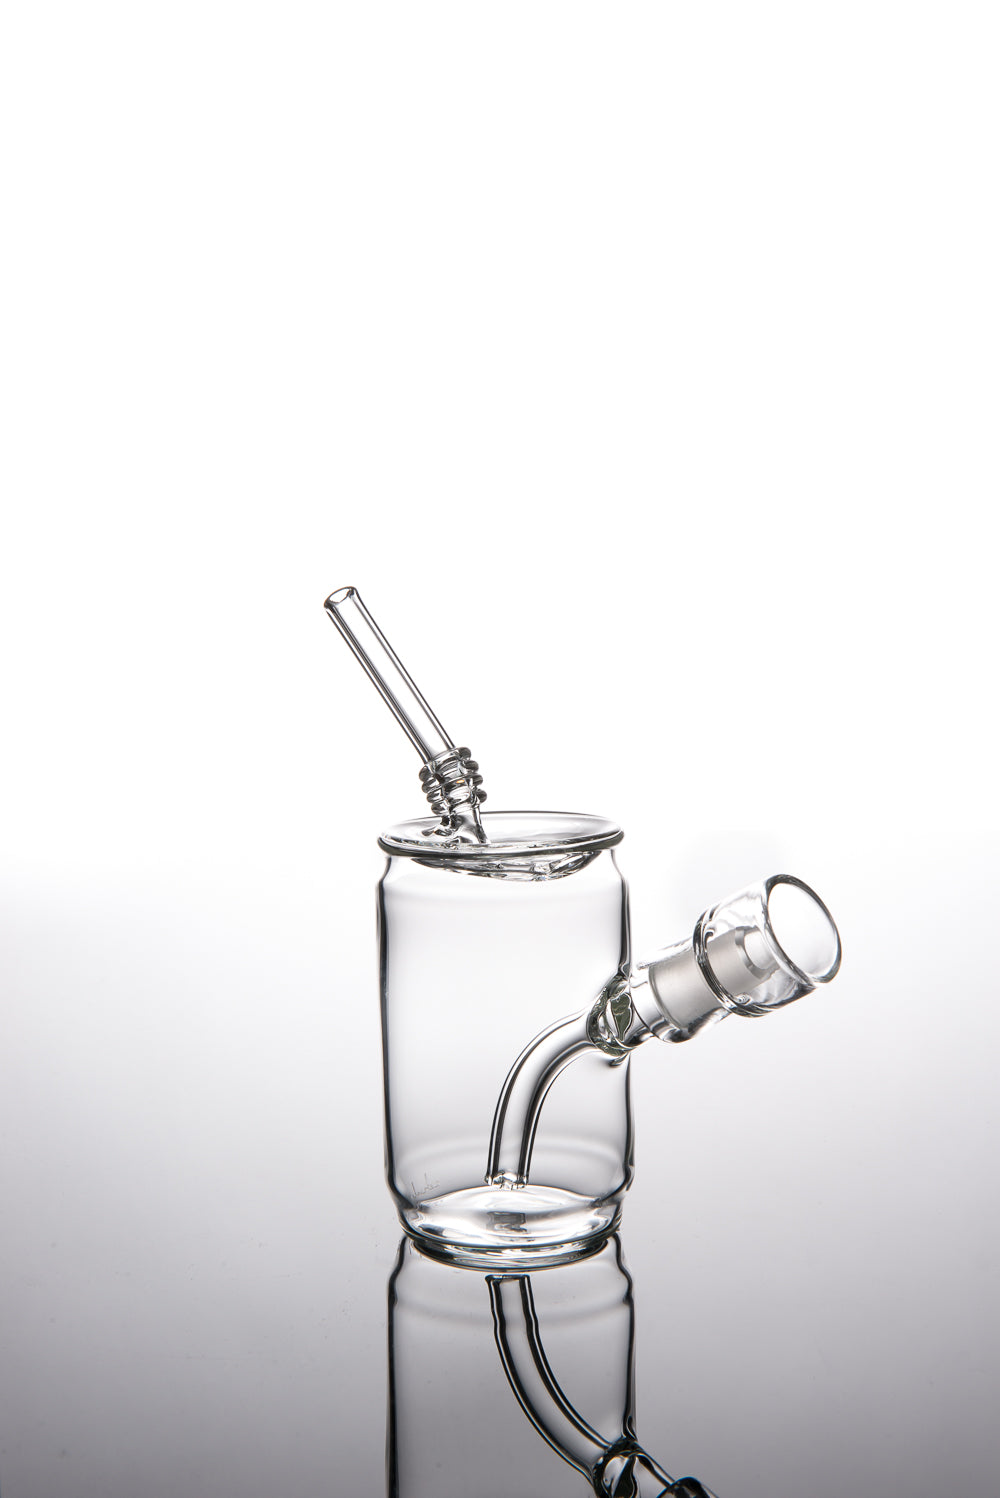 Clear Mini Can Vapor Bubbler with Straw#2  by Eskuche